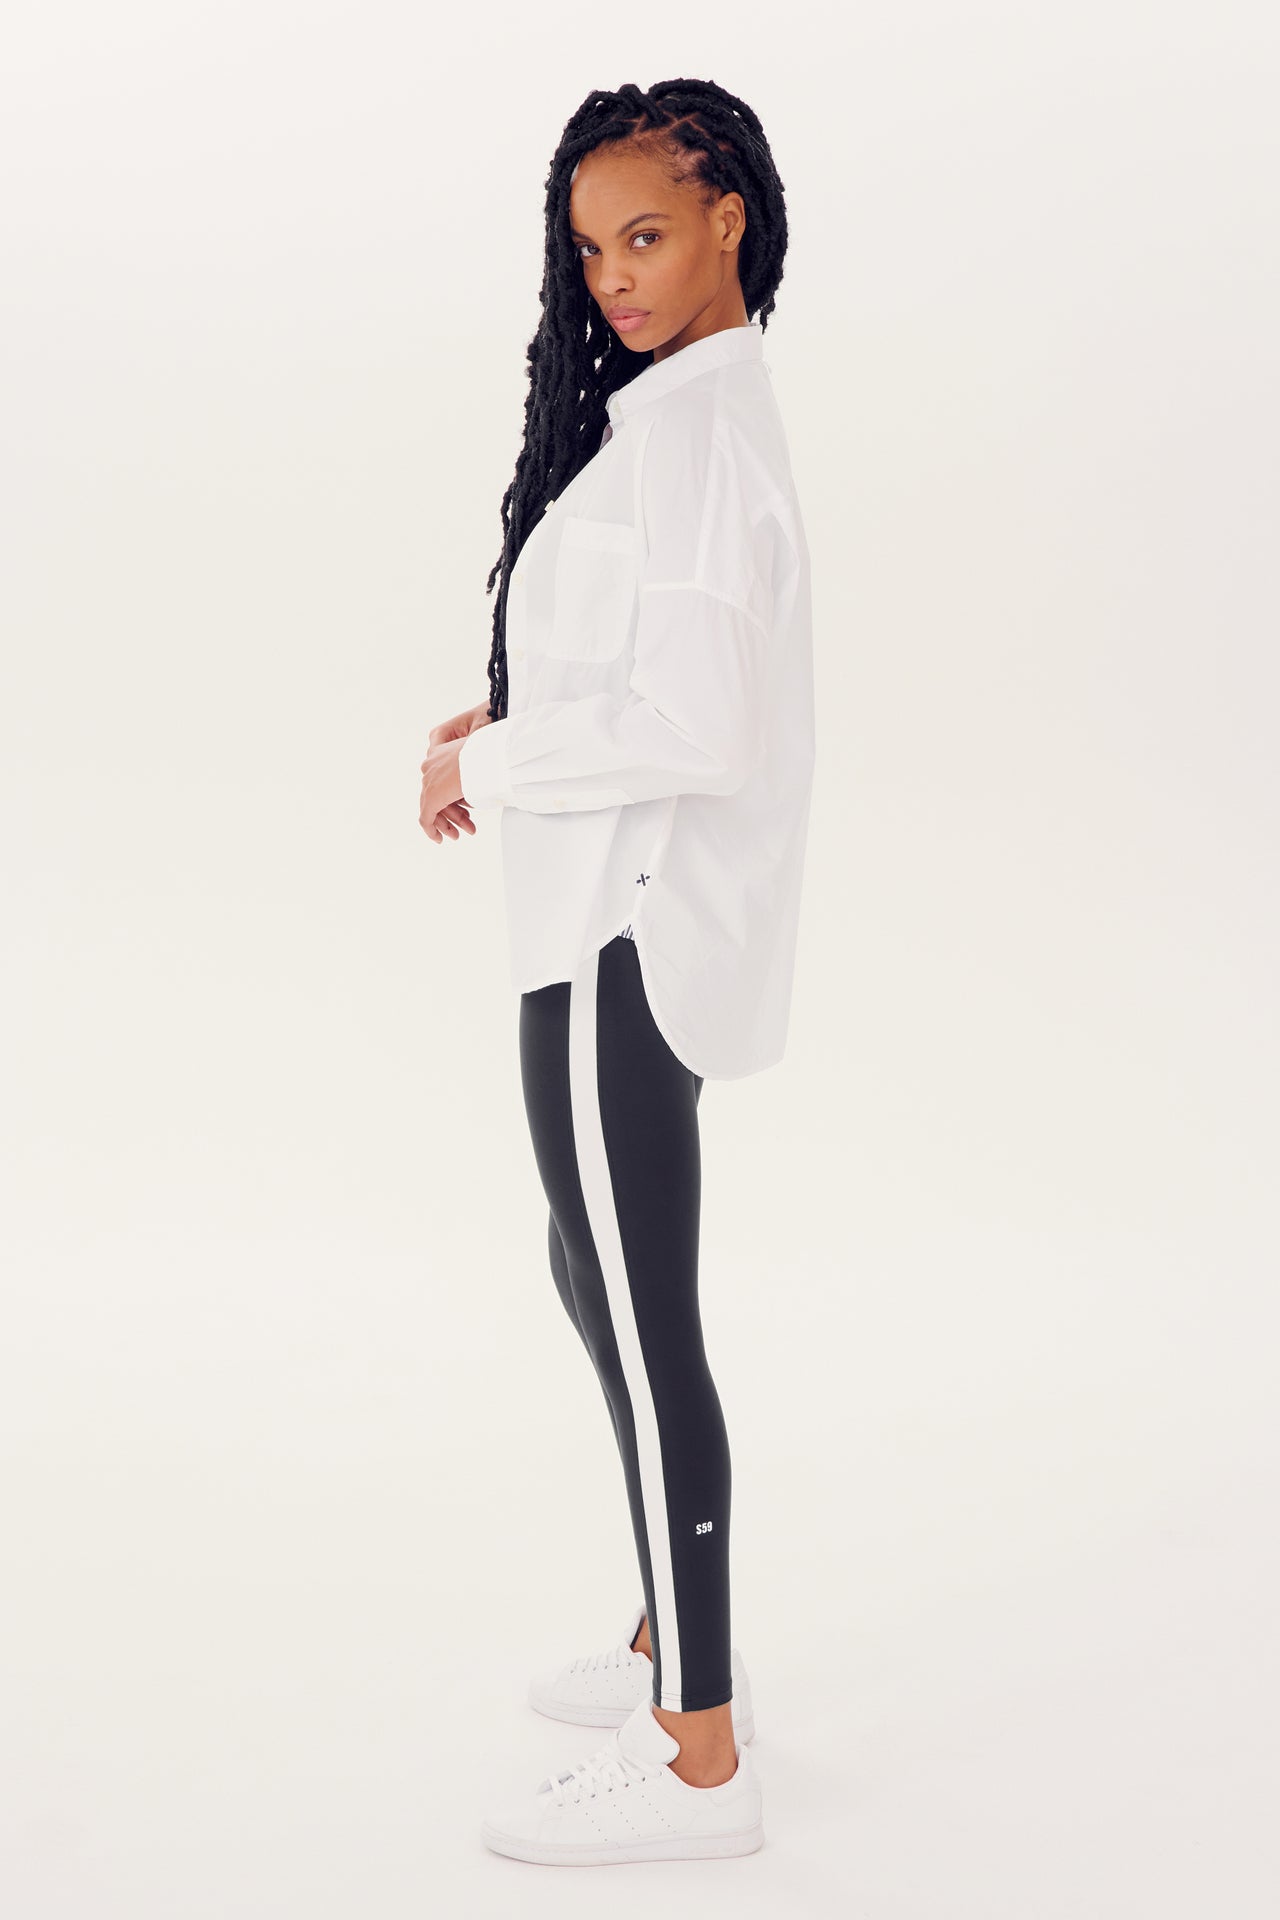 Woman posing in profile wearing a white Alex Mill x Splits59 Jo Shirt, black leggings with a white stripe from Splits59 looks, and white sneakers.